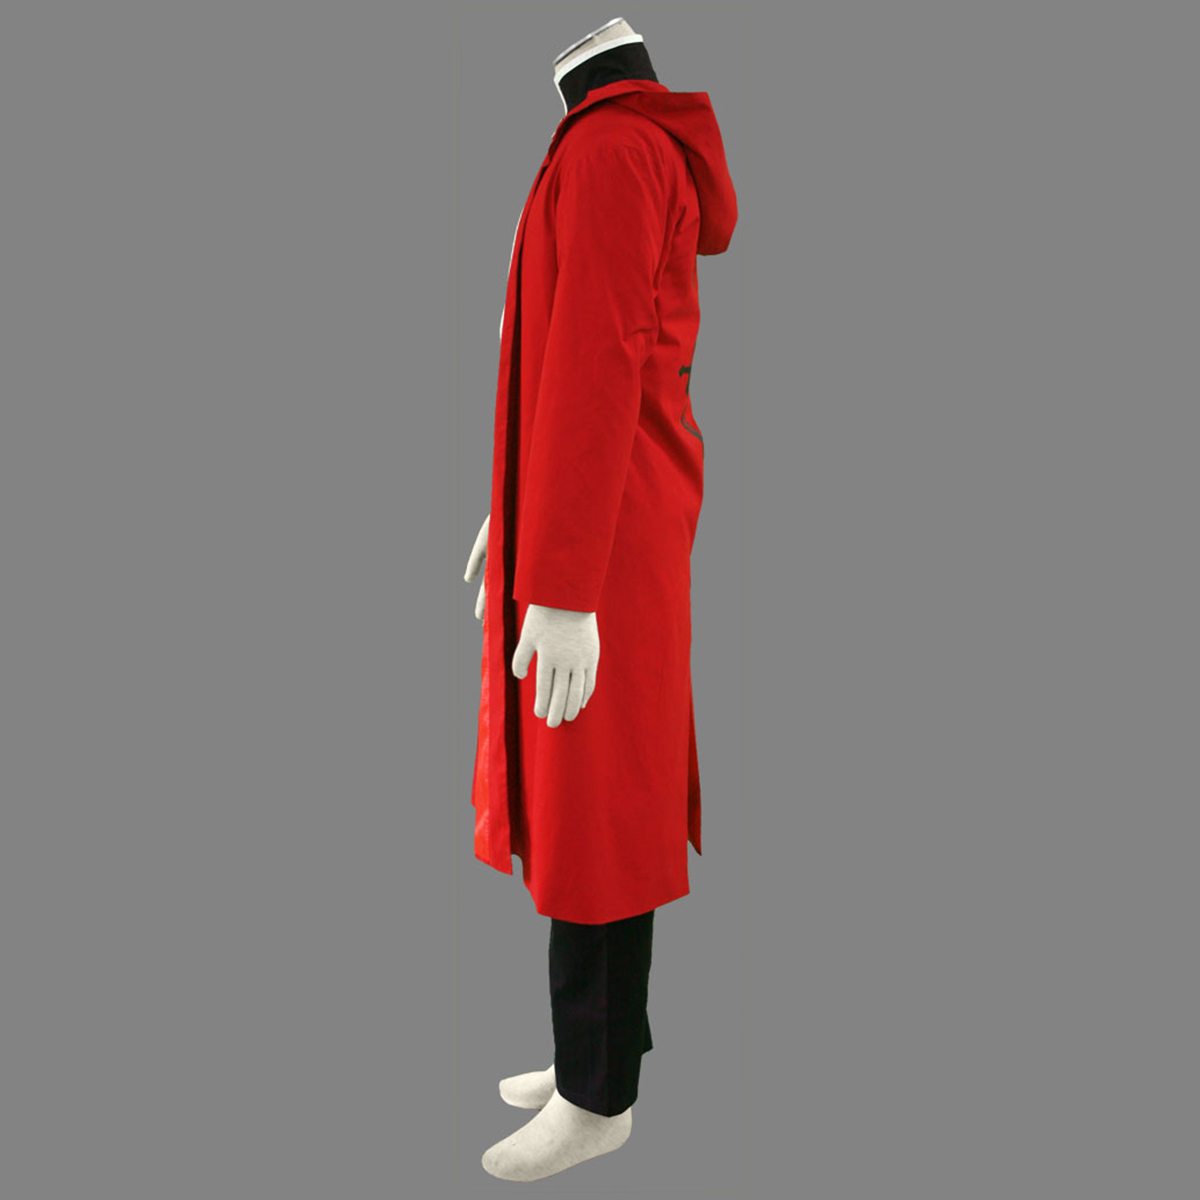 Fullmetal Alchemist Edward Elric 1 Anime Cosplay Costumes Outfit